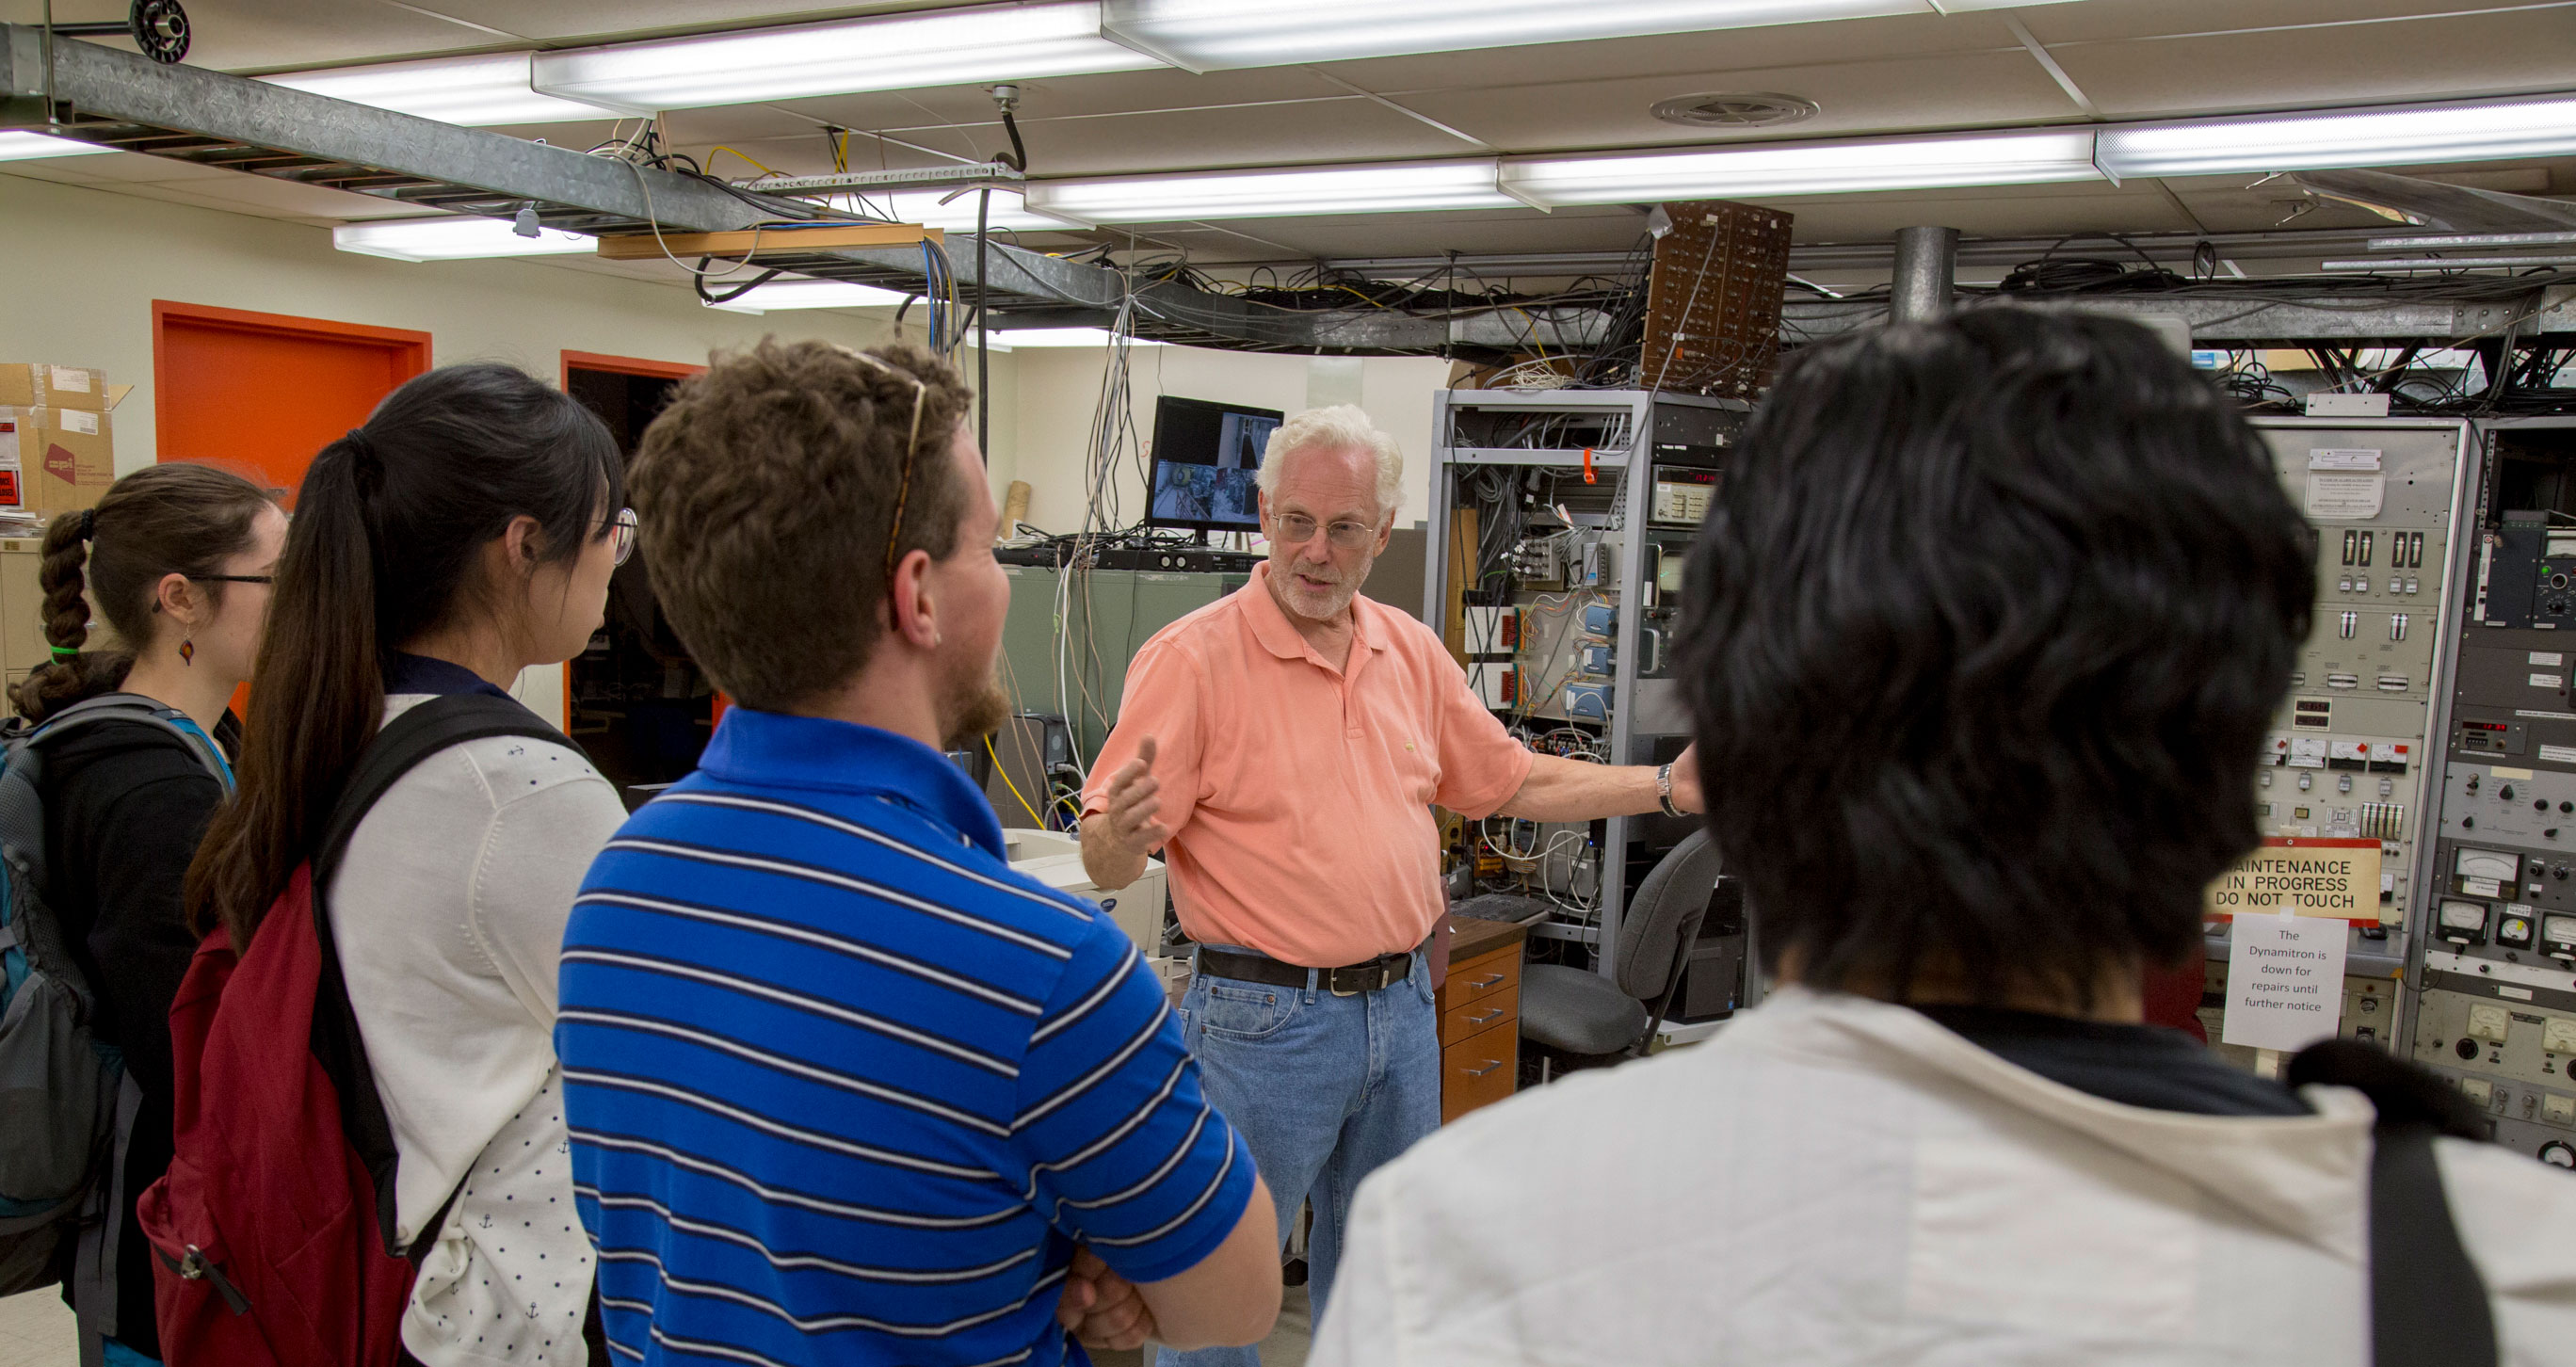 Dr. William Langford gestures as he speaks to a group of students touring the Ion Beam Lab.